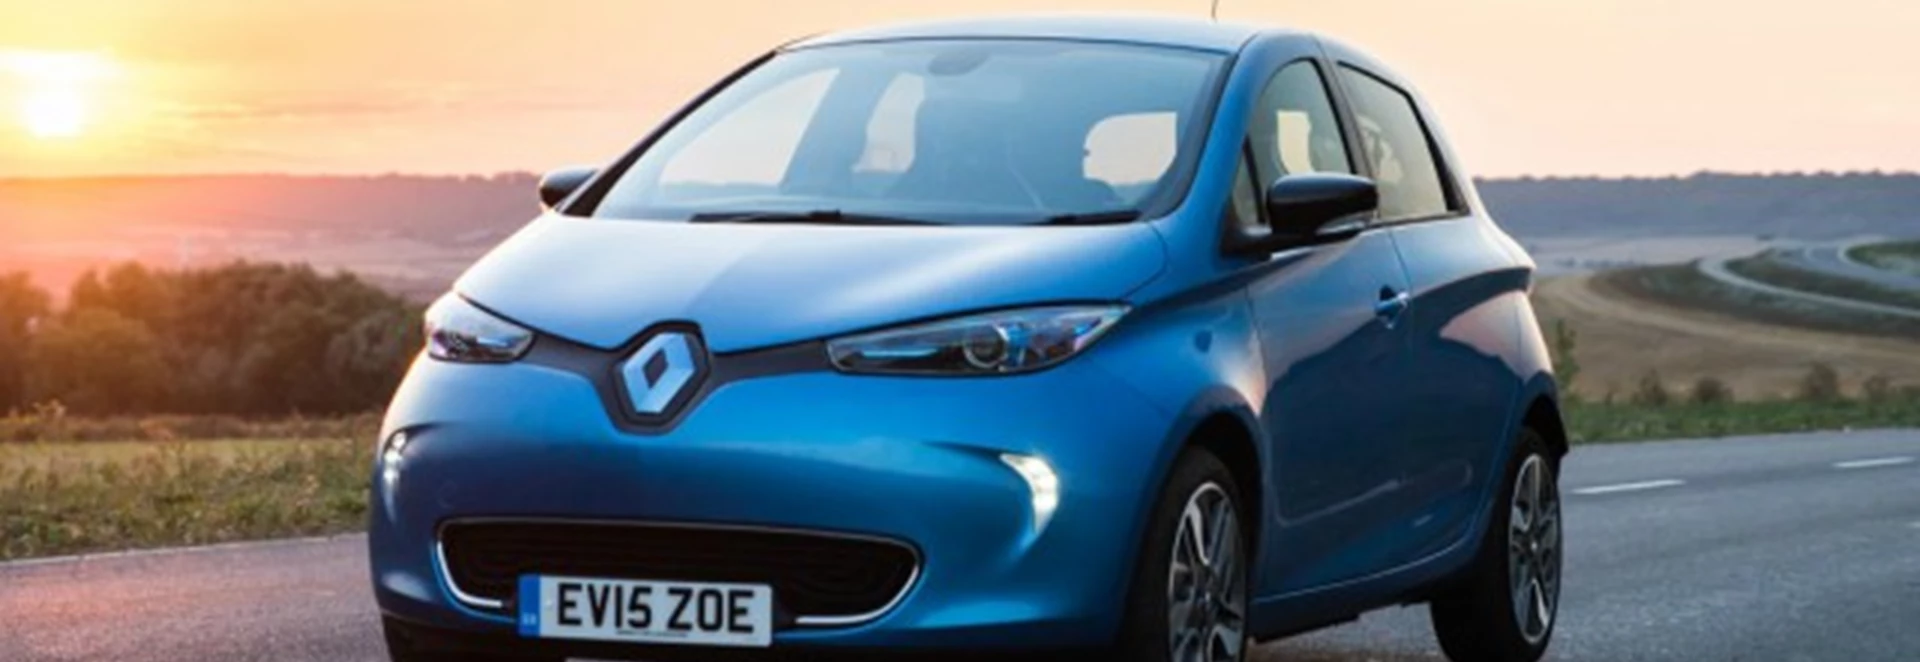 Best electric cars, our guide of top 5 electric cars 